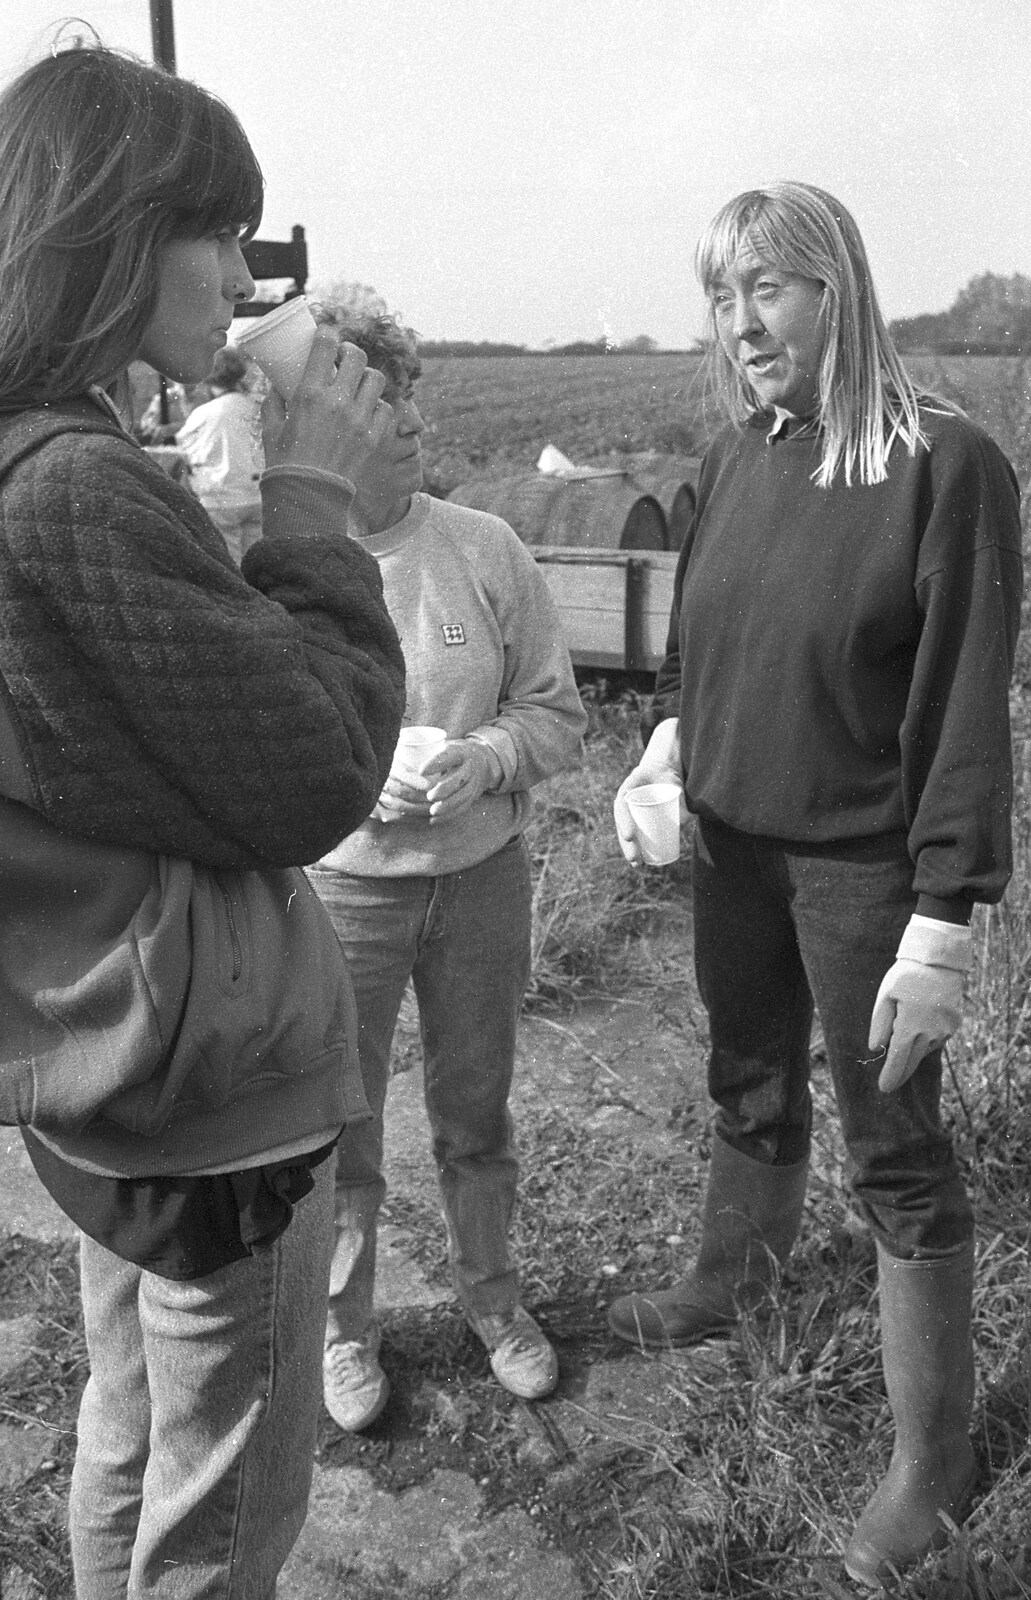 Mad Sue talks to someone from Cider Making in Black and White, Stuston, Suffolk - 11th October 1992